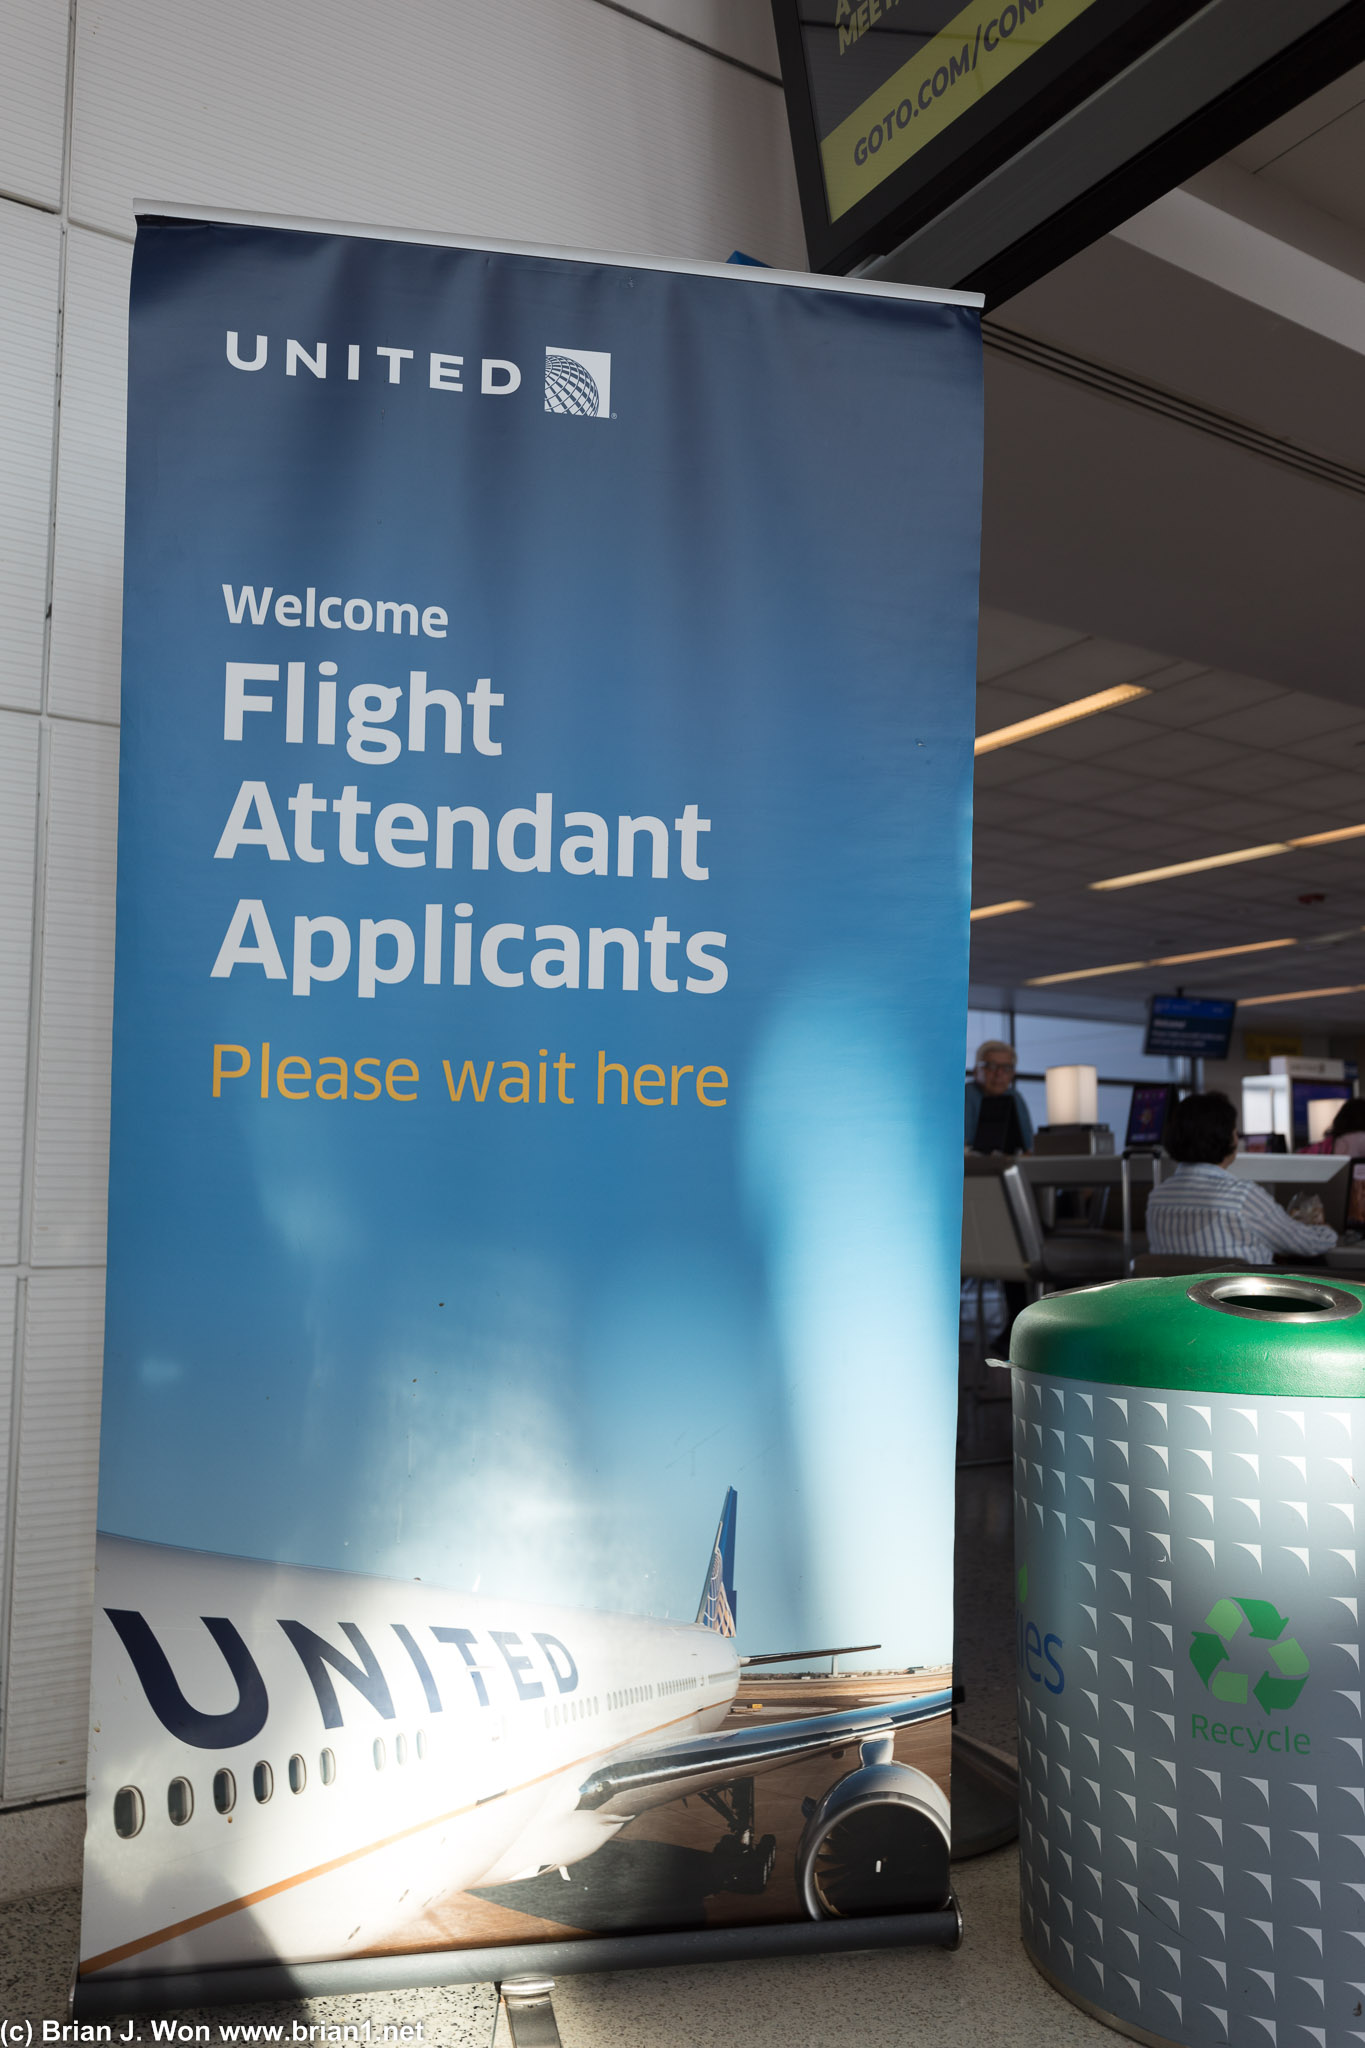 Apparently United is hiring?